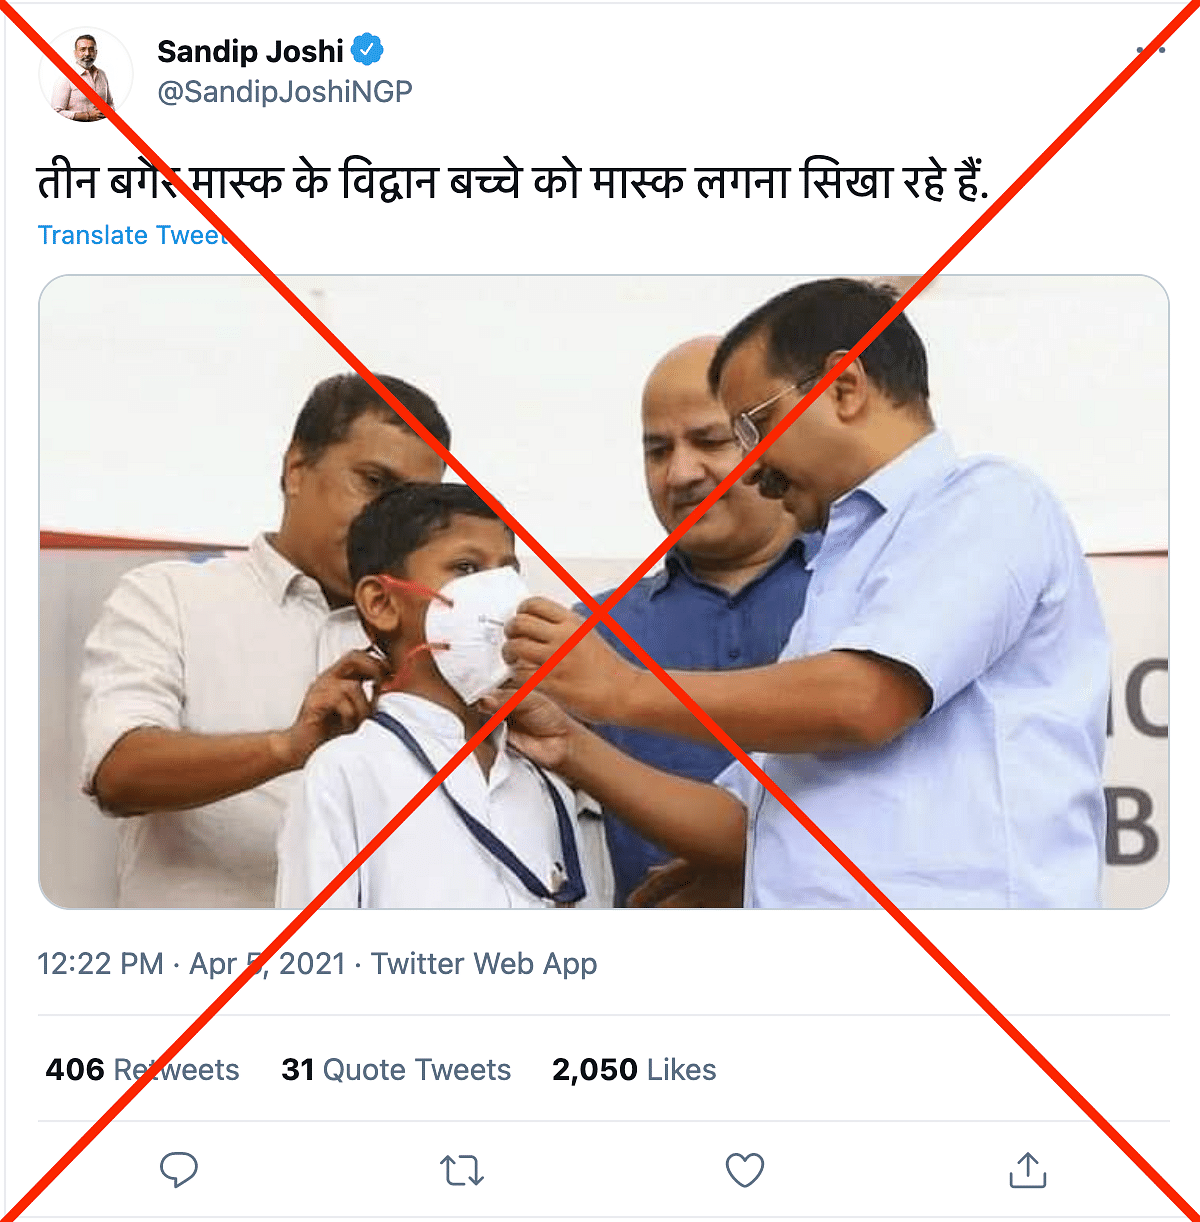 The image is from November 2019 when Kejriwal along with Manish Sisodia distributed masks to school children.